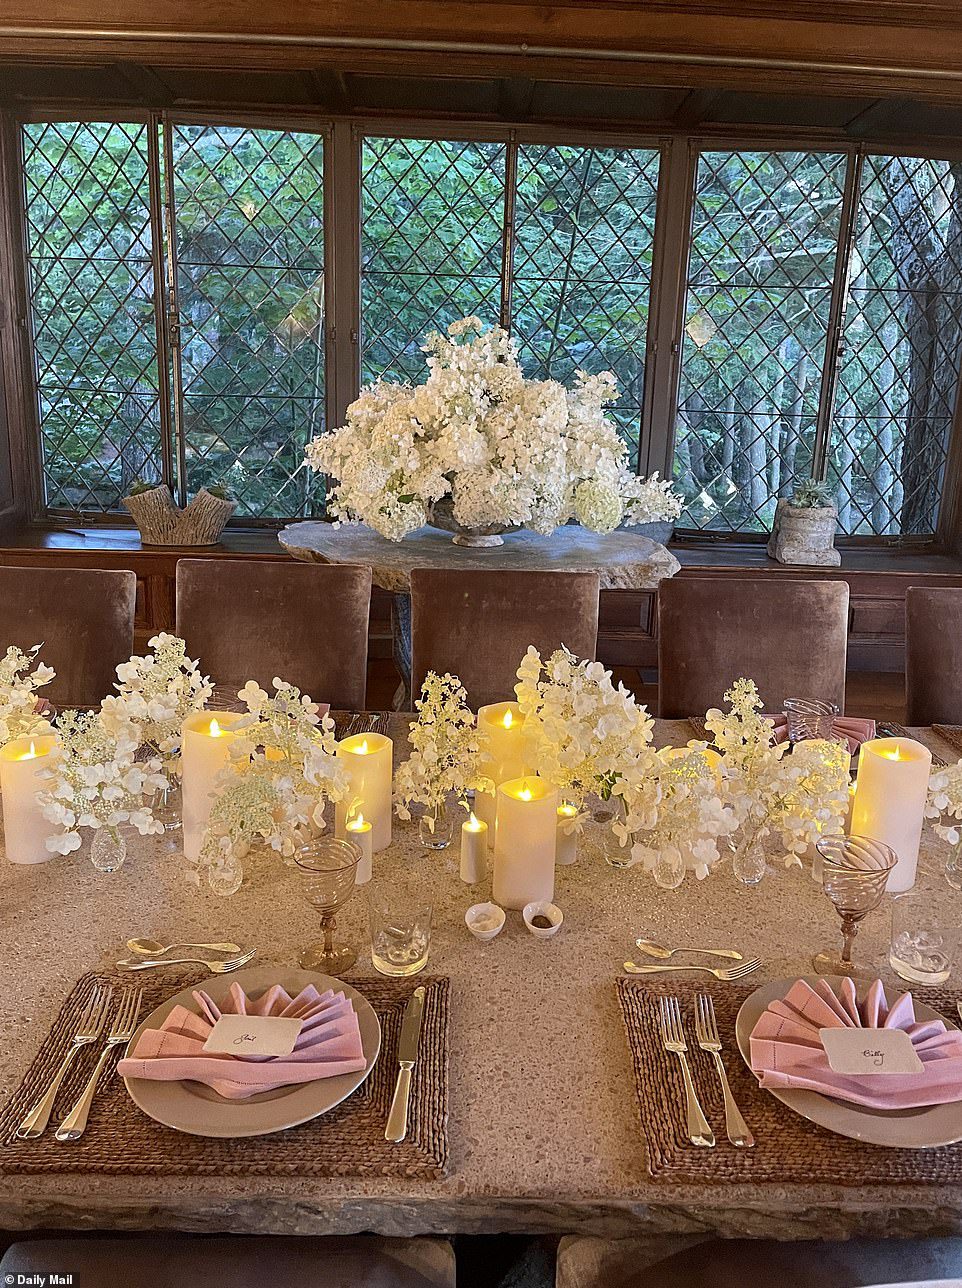 Candlelight: Table settings include shades of white, pink and brown